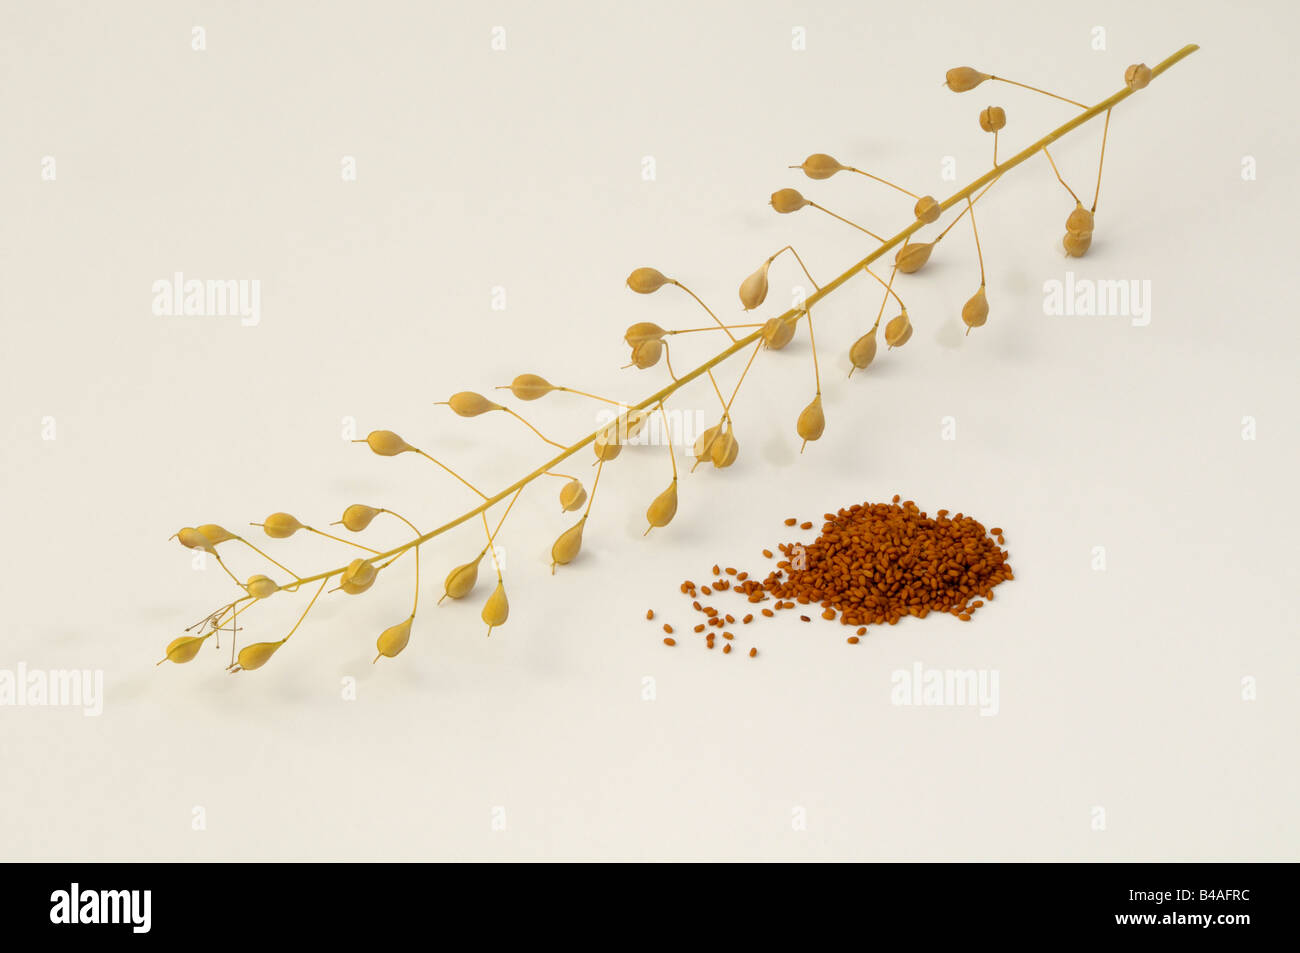 Wild Flax, Linseed Dodder (Camelina sativa), twig and seeds Stock Photo